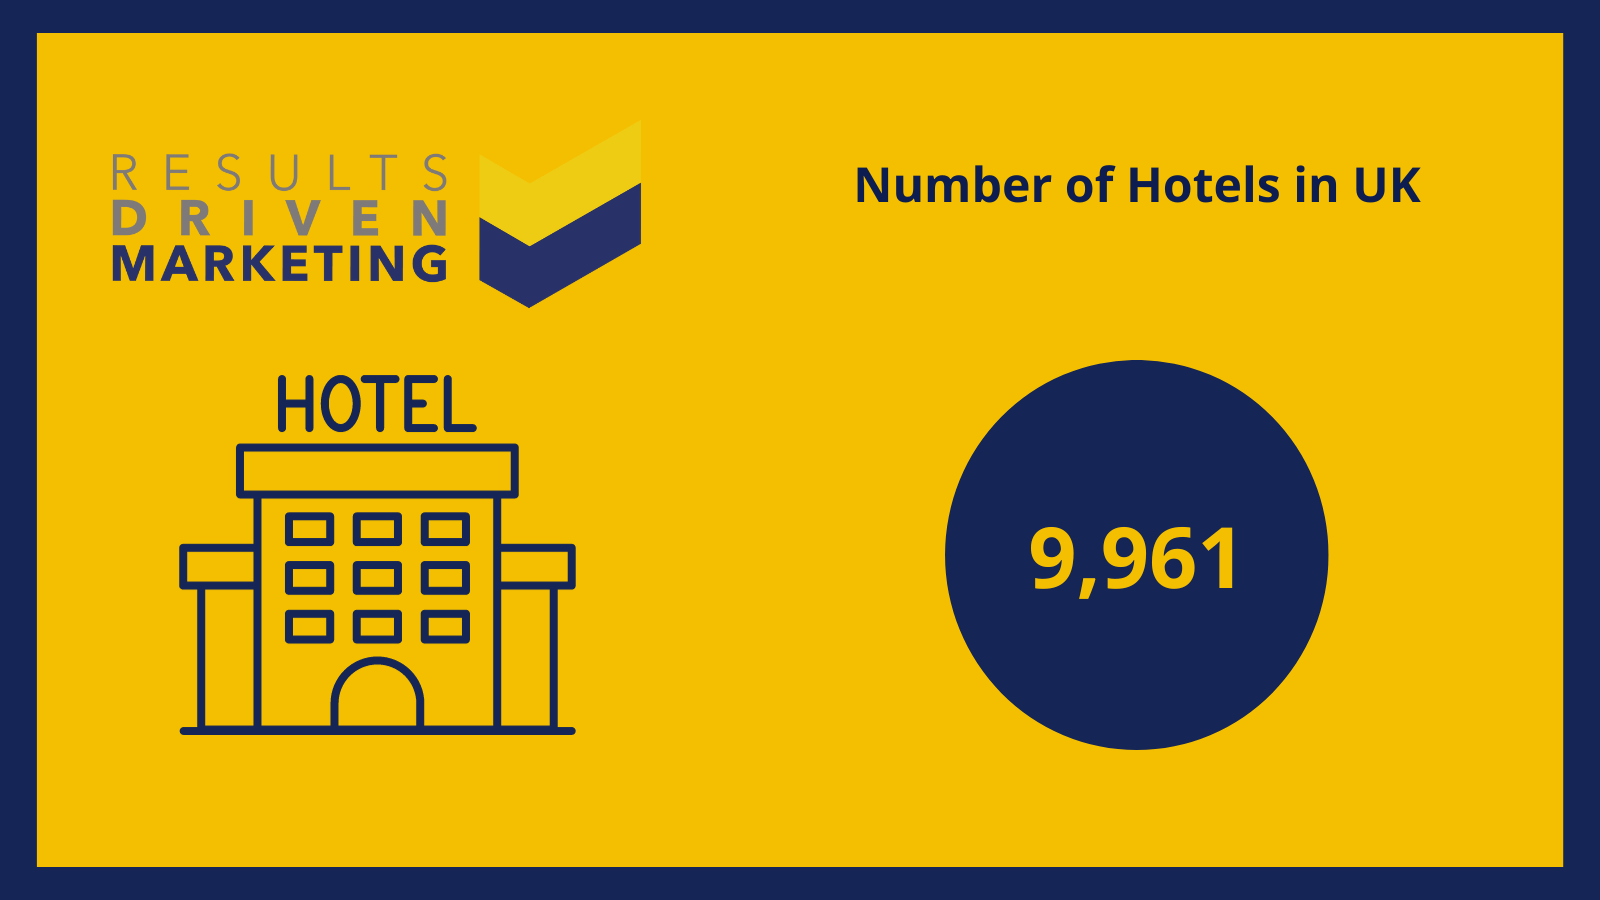 How Many Hotels in the UK?